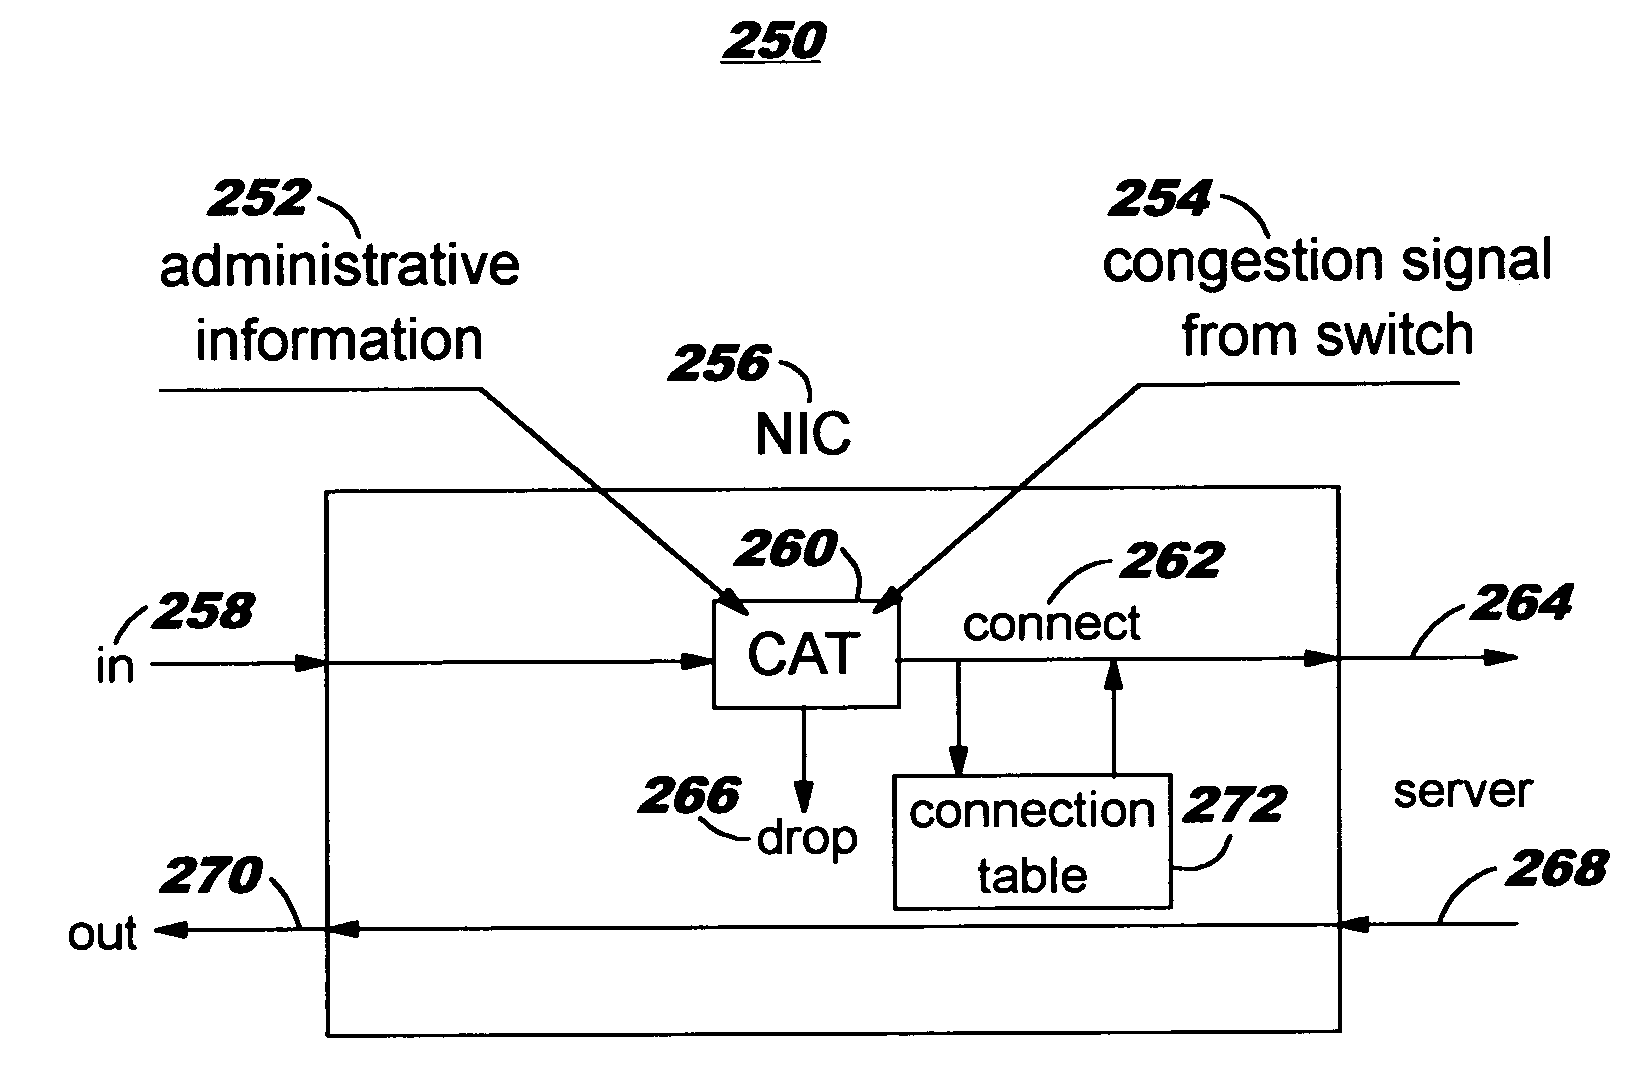 Connection allocation technology